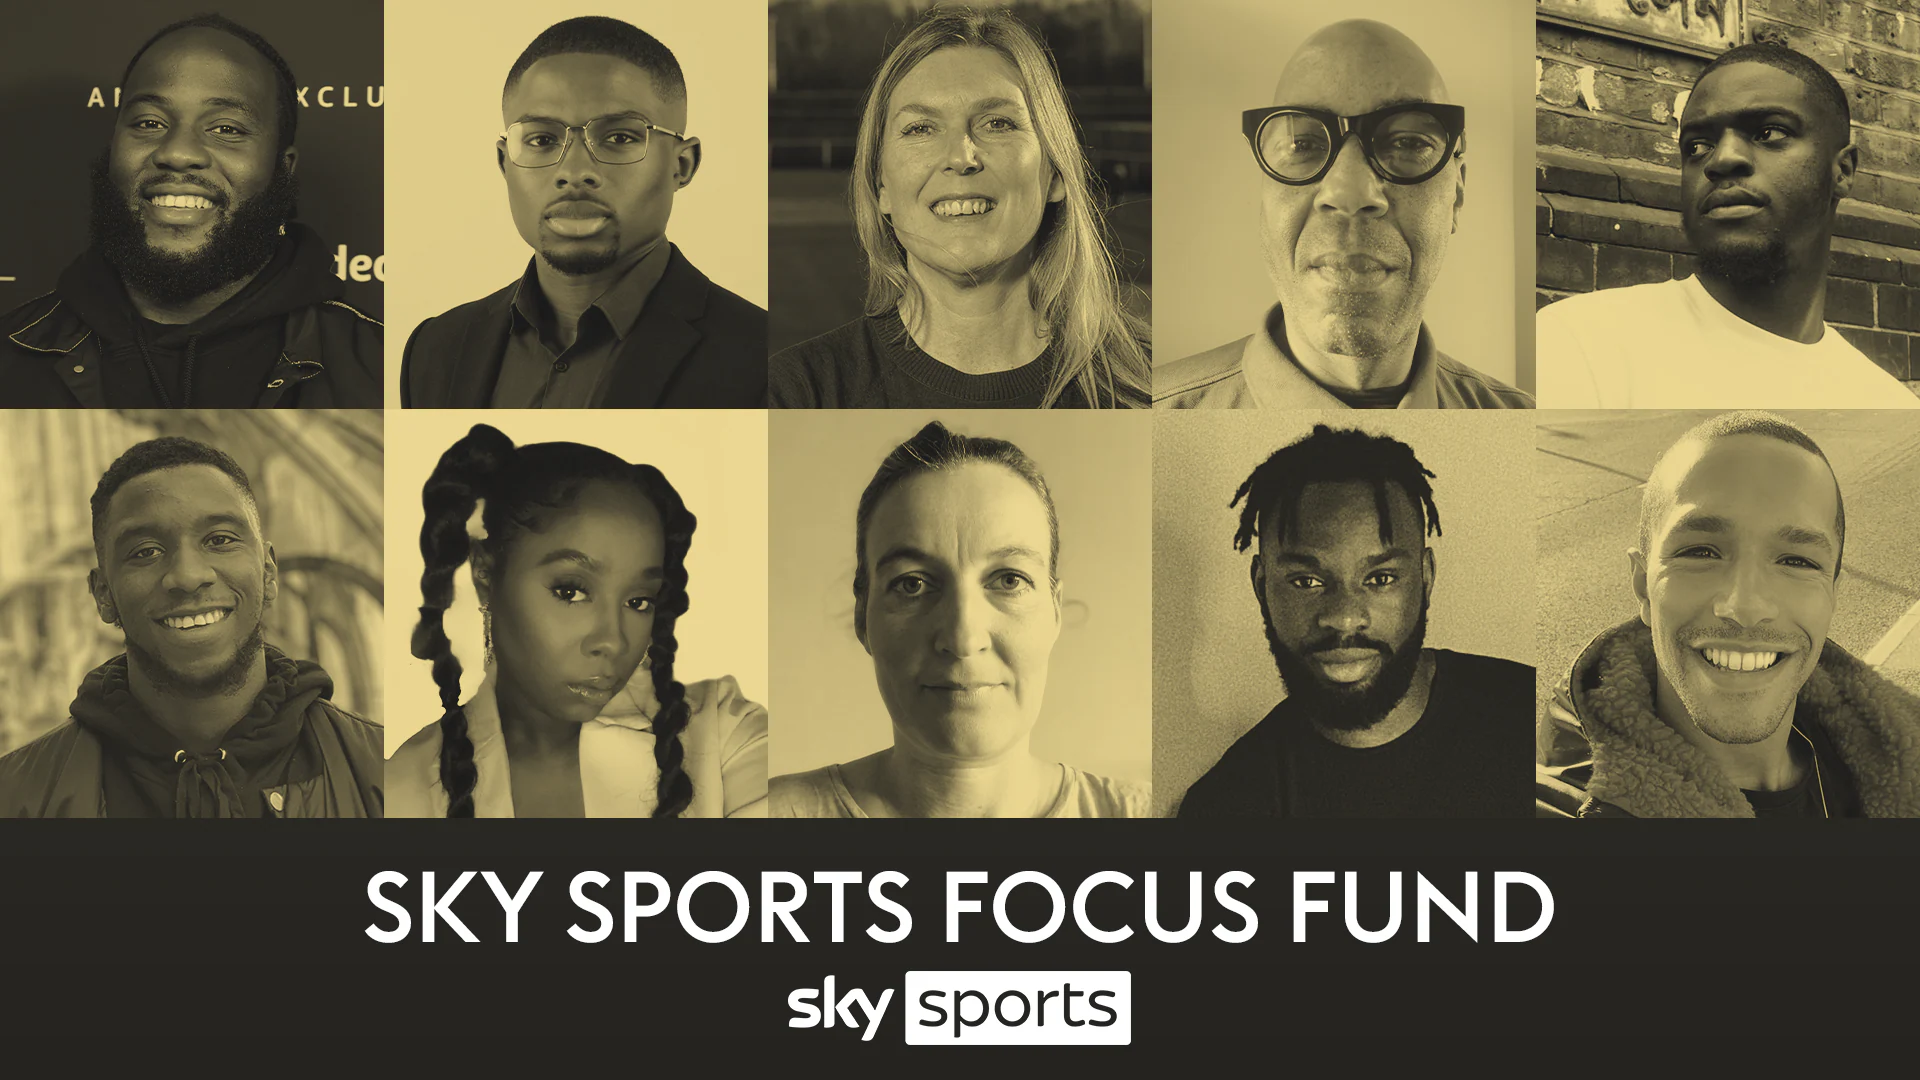 Content creators selected for new Sky Sports production fund